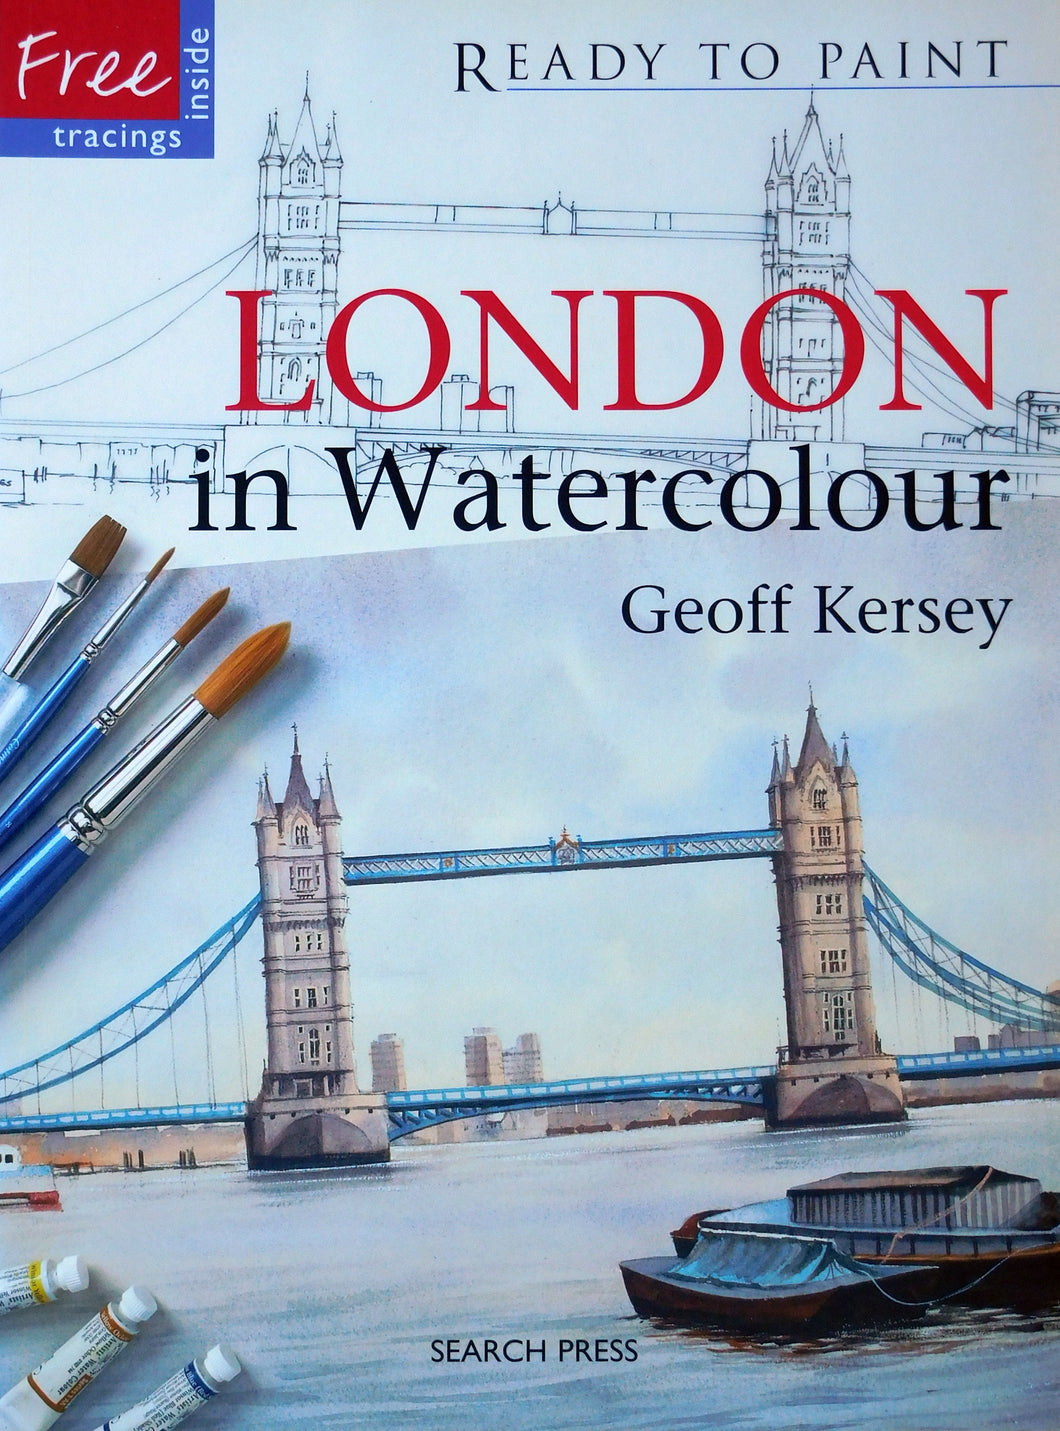 Ready to Paint - London in Watercolour